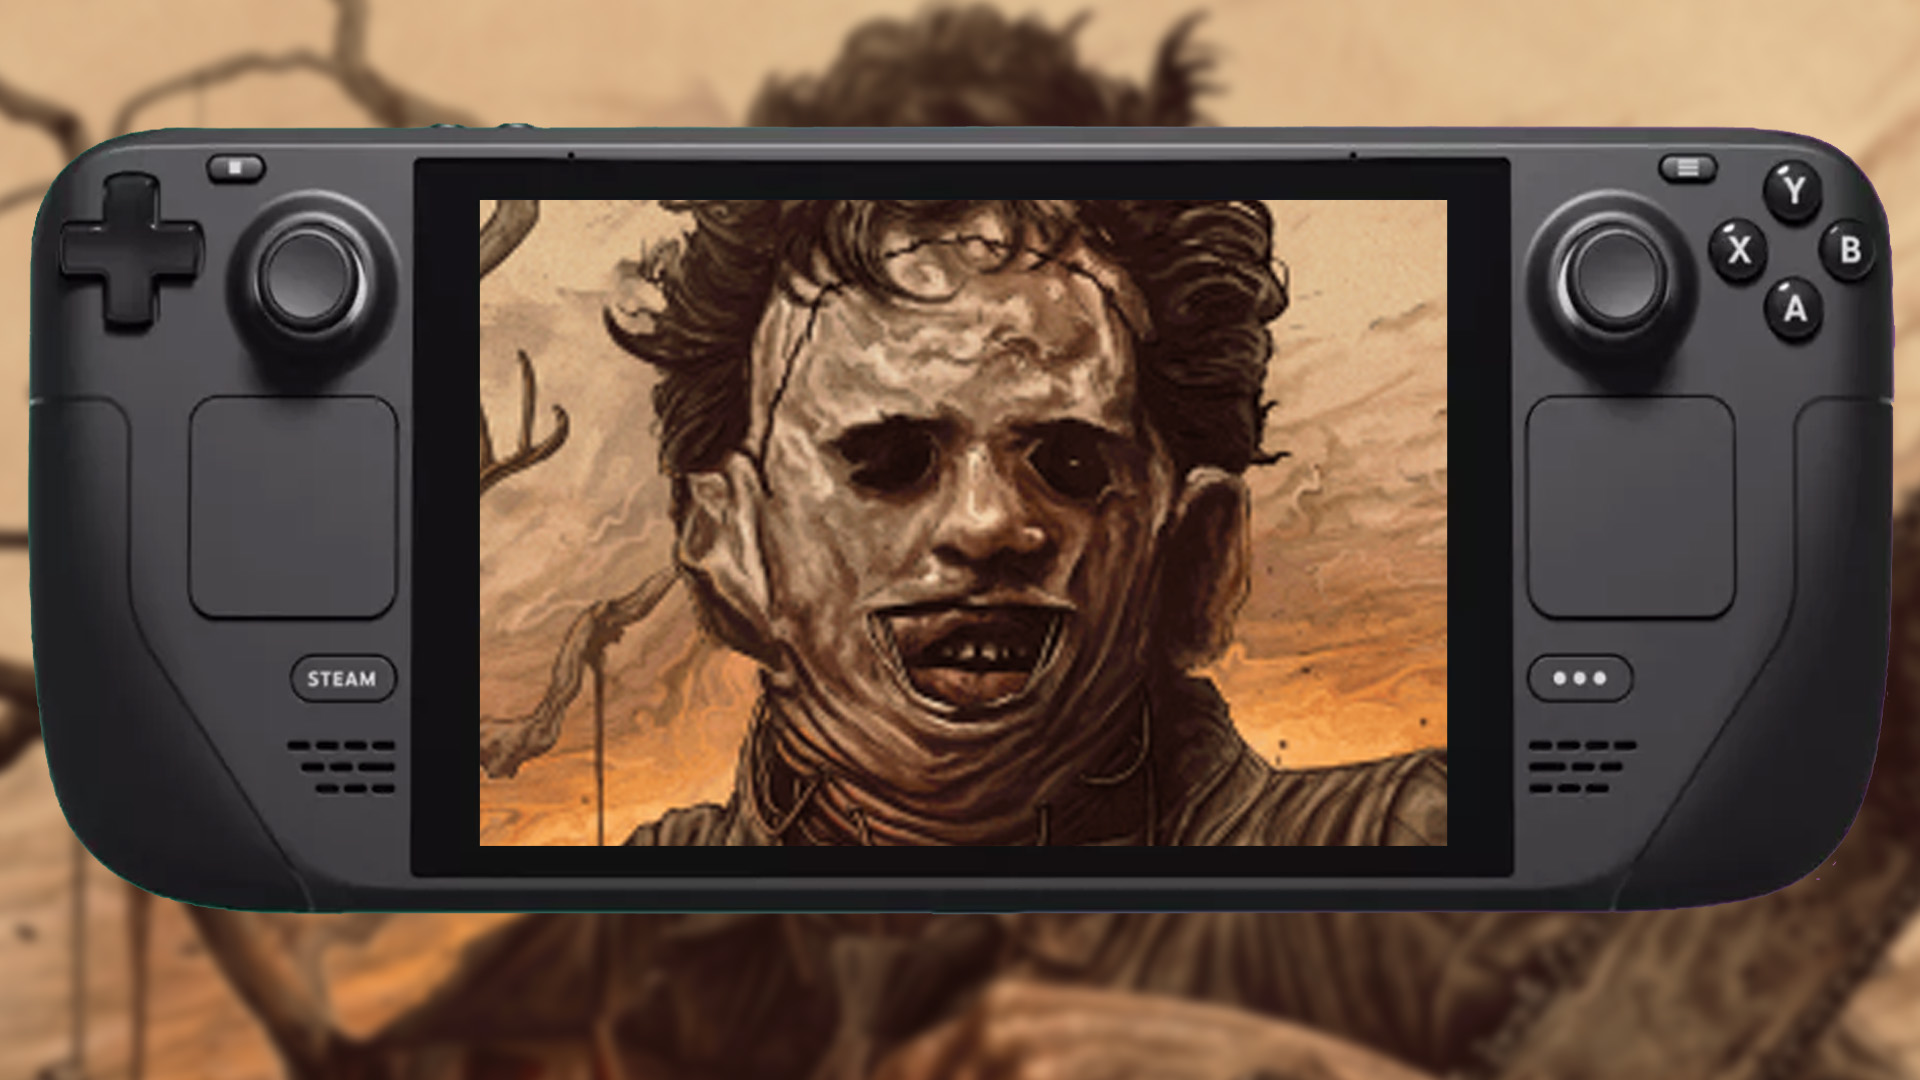 Is The Texas Chain Saw Massacre Steam Deck compatible?